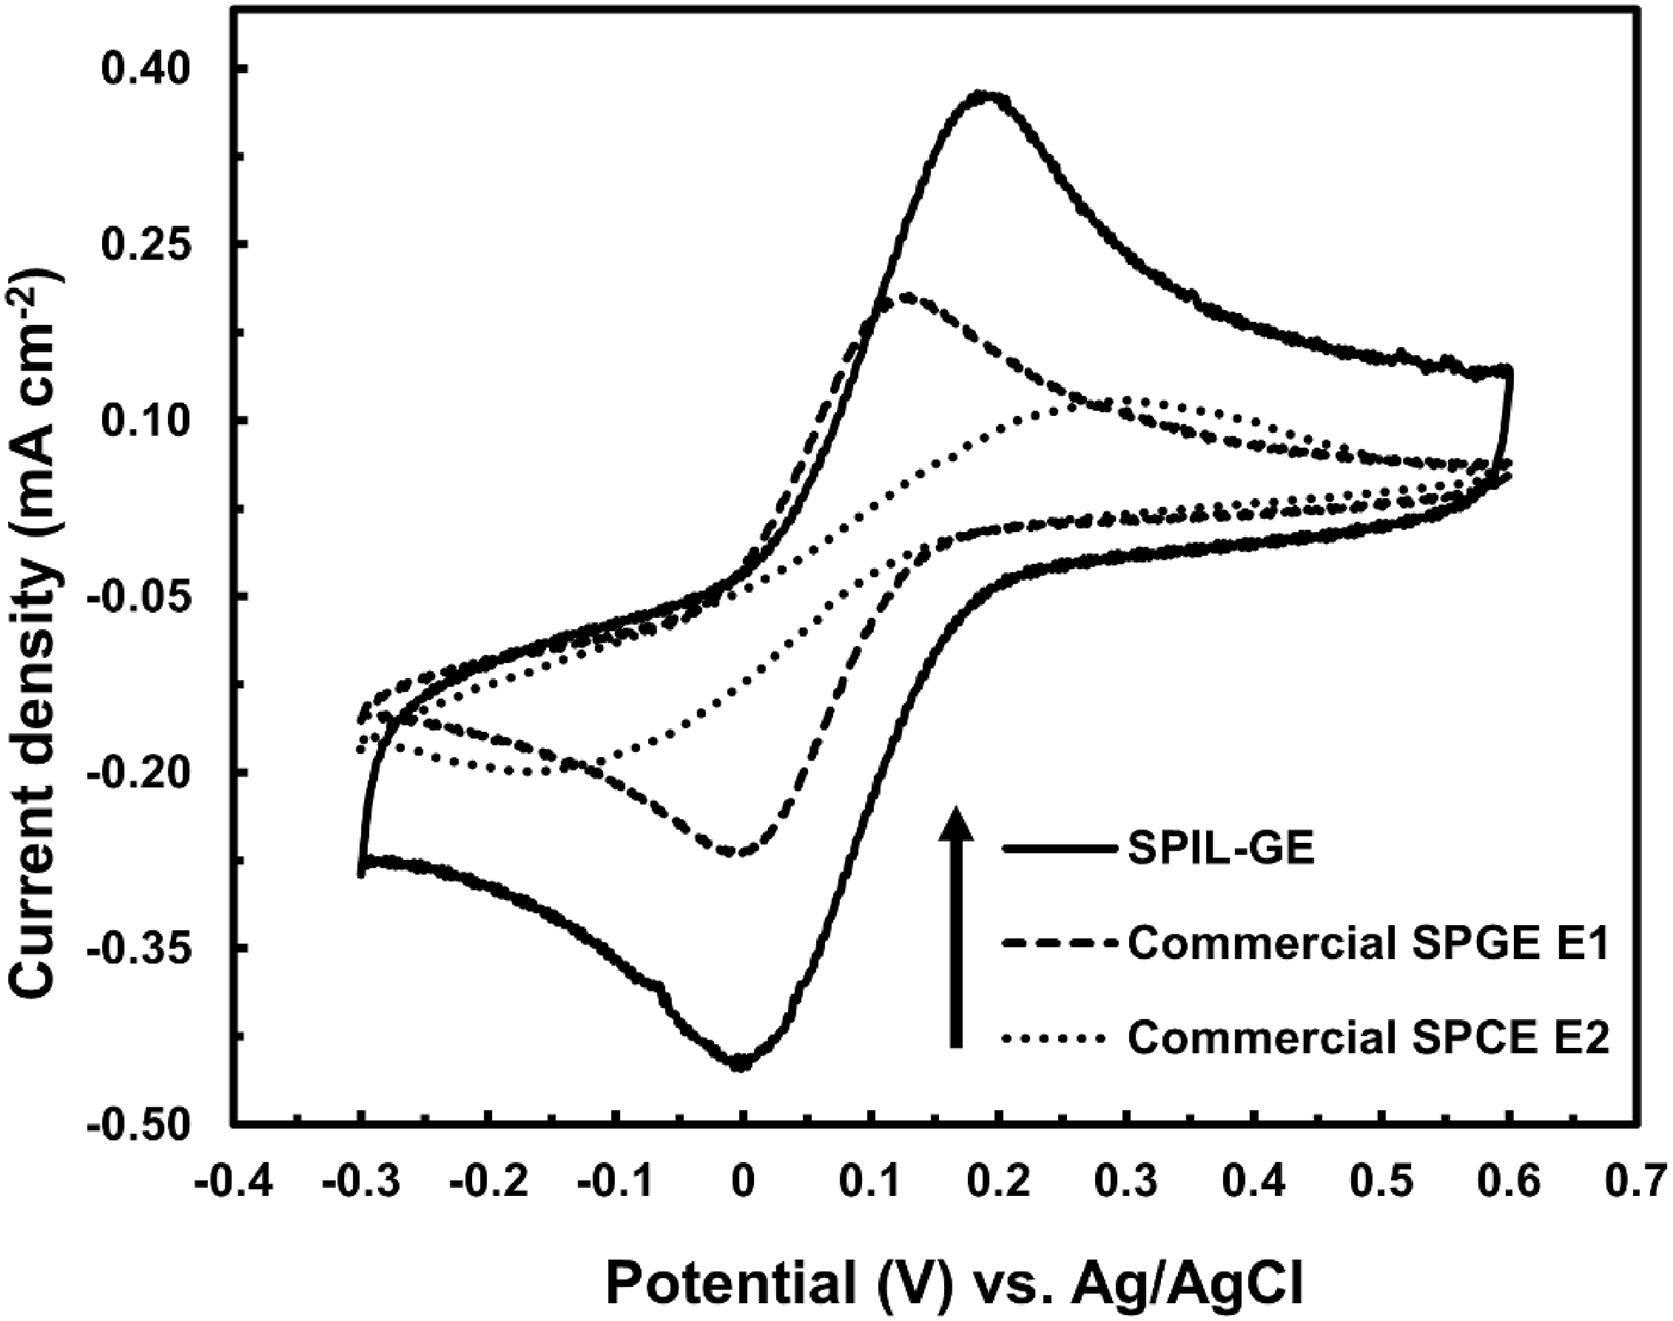 Cyclic voltammograms of SPIL-GE and two commercial SPGE E1 and SPCE E2 towards 2.5 mM K3Fe(CN)6 at 50 mVs-1.